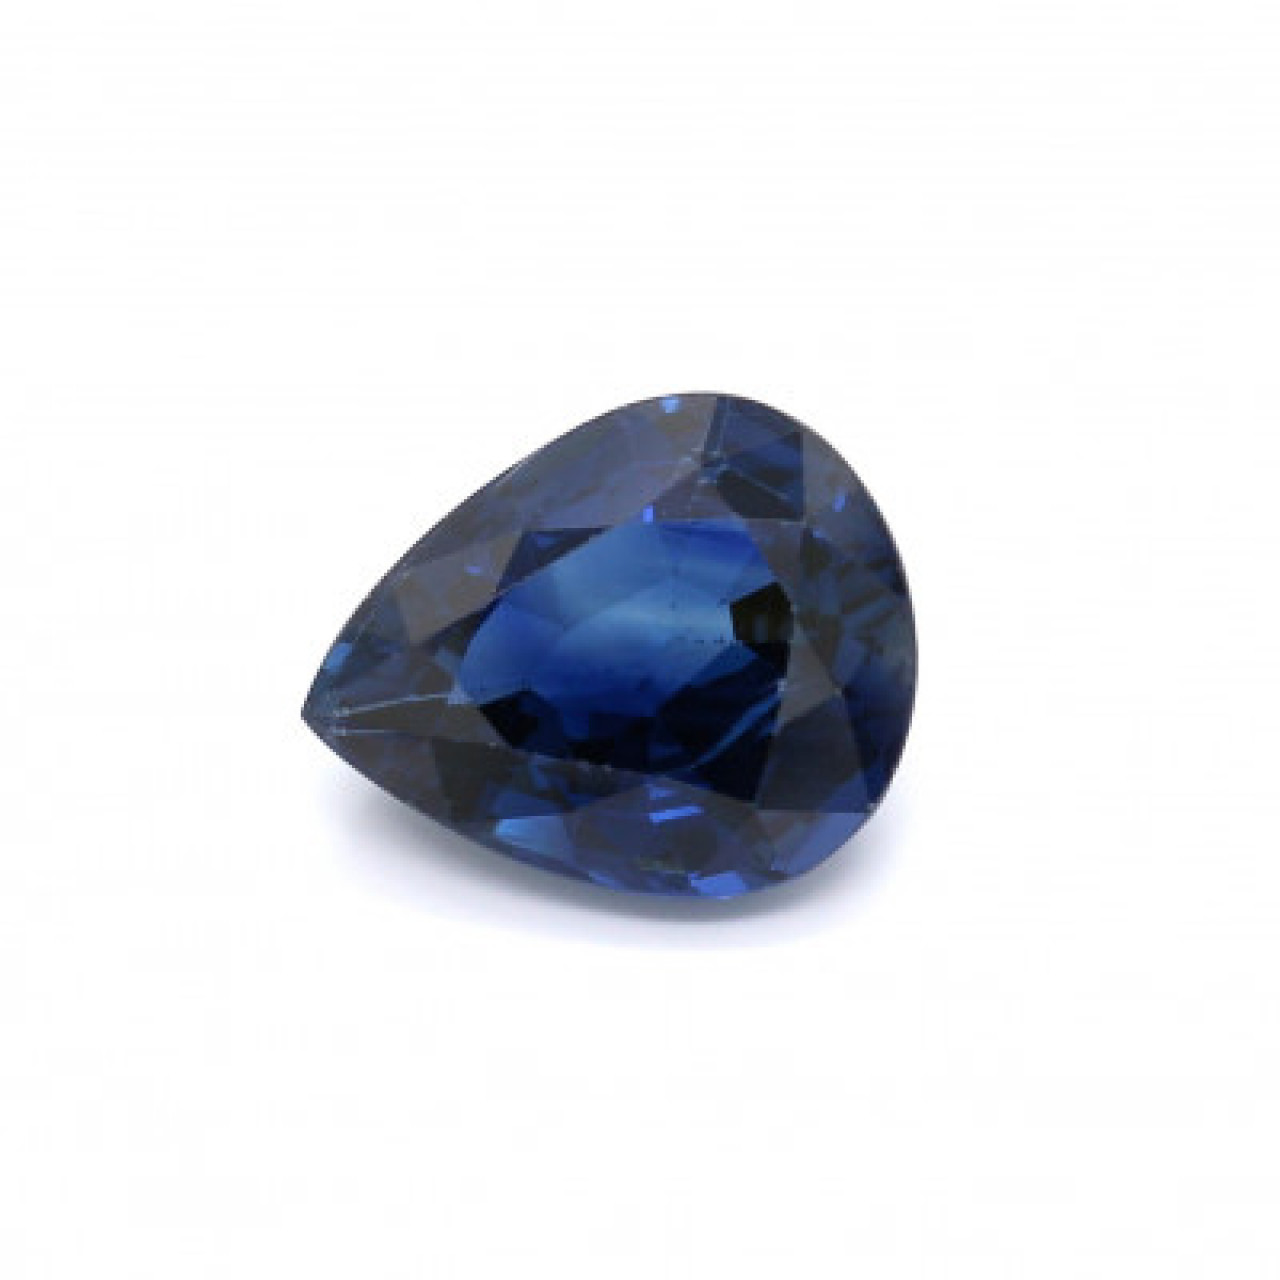 Details about  / Natural Sapphire Loose Gemstone 10 Ct Certified Pear Shape Blue Ceylon Pair